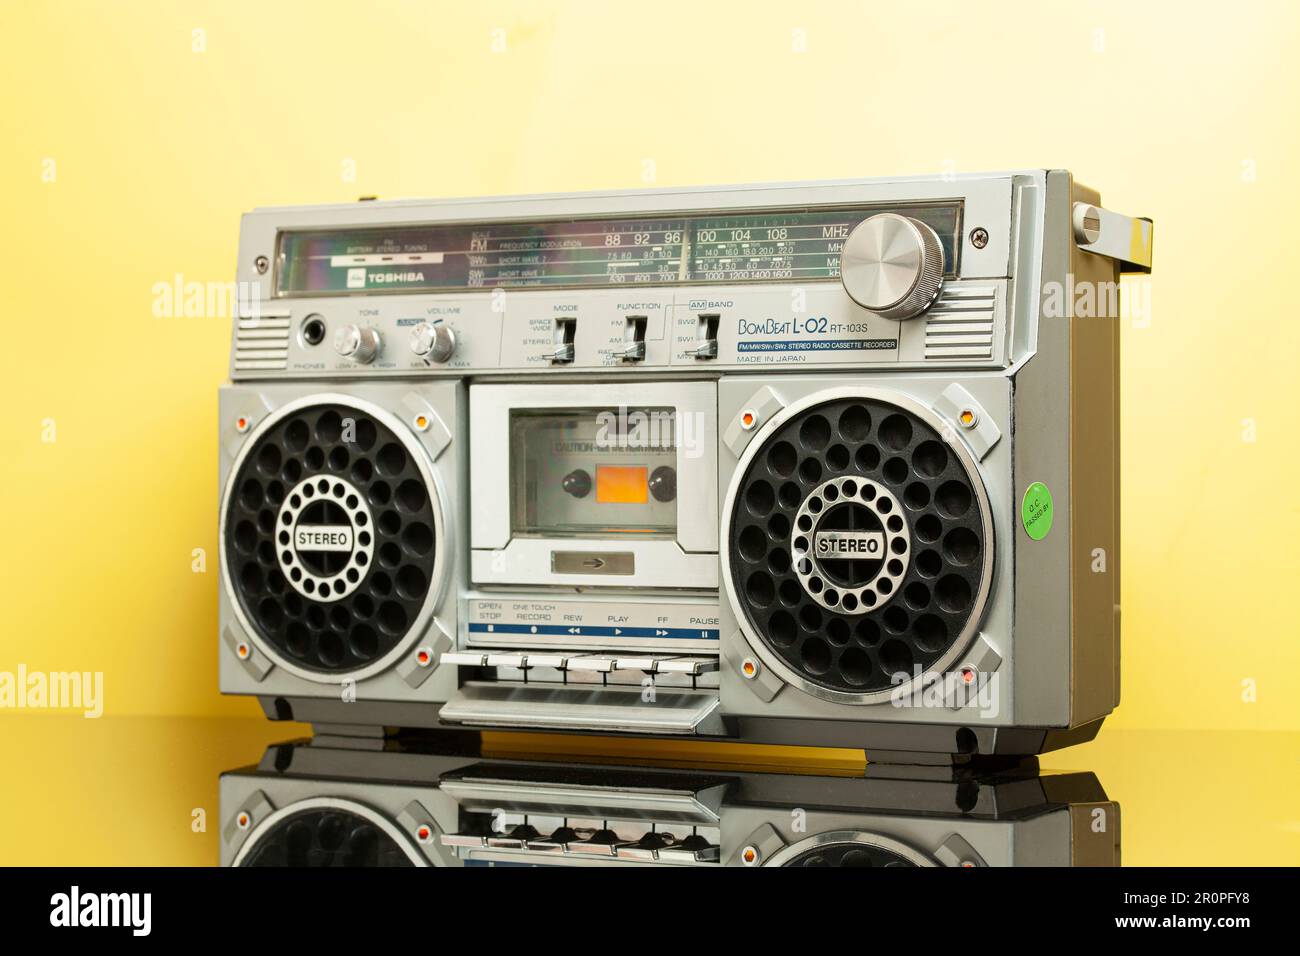 Moscow, Russia, May 9 2023: Toshiba RT-103S bombeat L-02 stereo radio  cassette recorder Stock Photo - Alamy